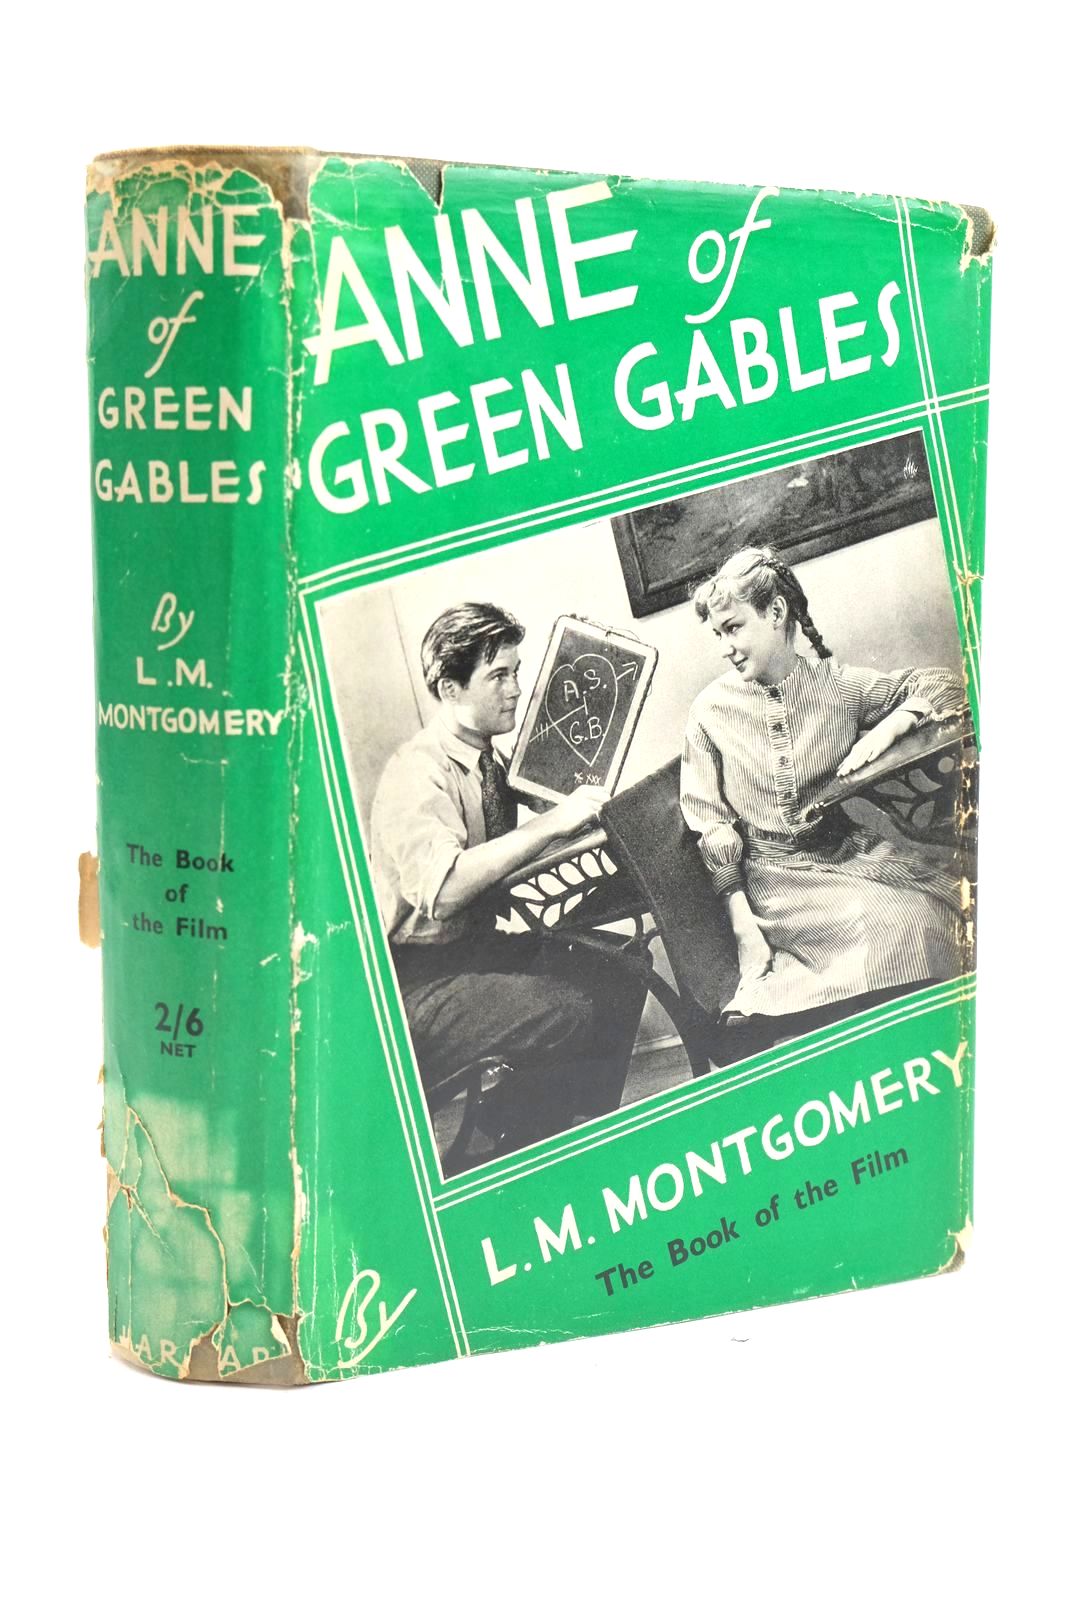 Photo of ANNE OF GREEN GABLES written by Montgomery, L.M. published by George G. Harrap &amp; Co. Ltd. (STOCK CODE: 1320120)  for sale by Stella & Rose's Books